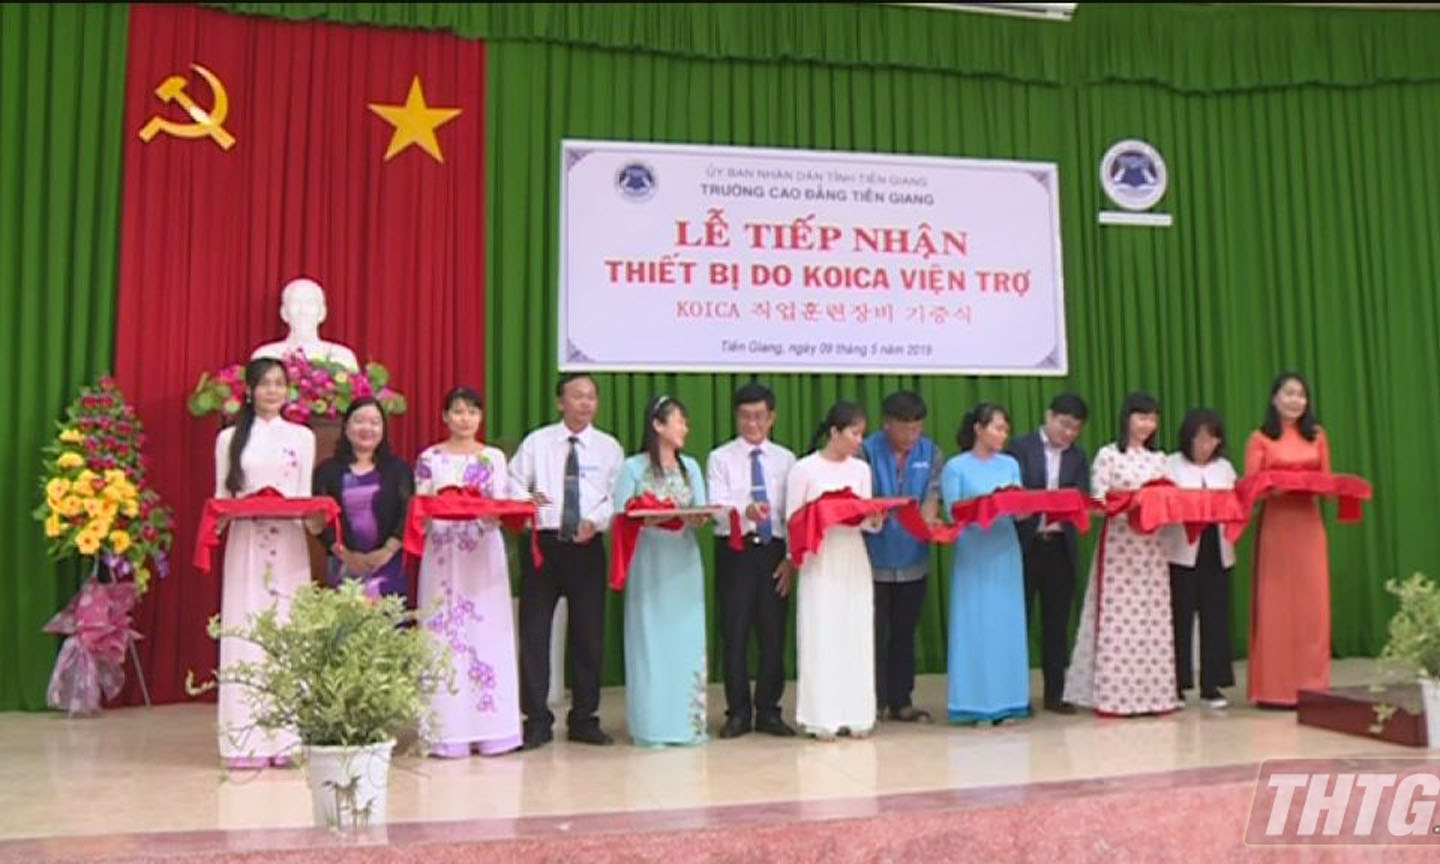 At the cutting ribbon ceremony. Photo: thtg.vn